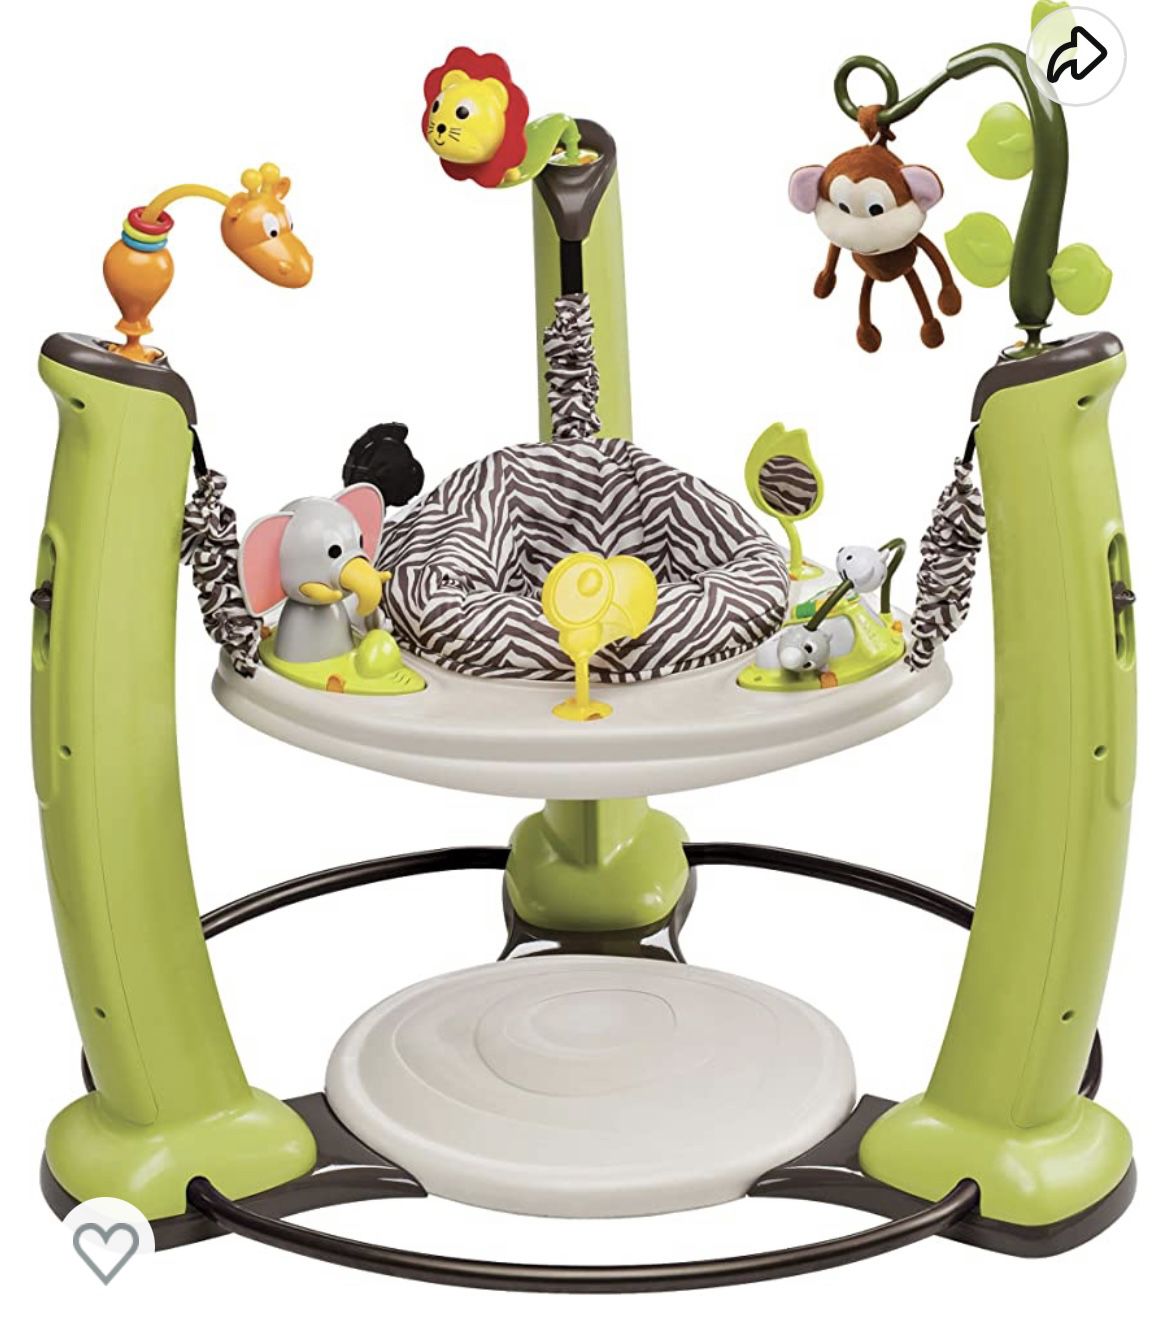 Evenflo ExerSaucer Jump & Learn Jungle Quest Stationary Baby Jumper (Open Box)